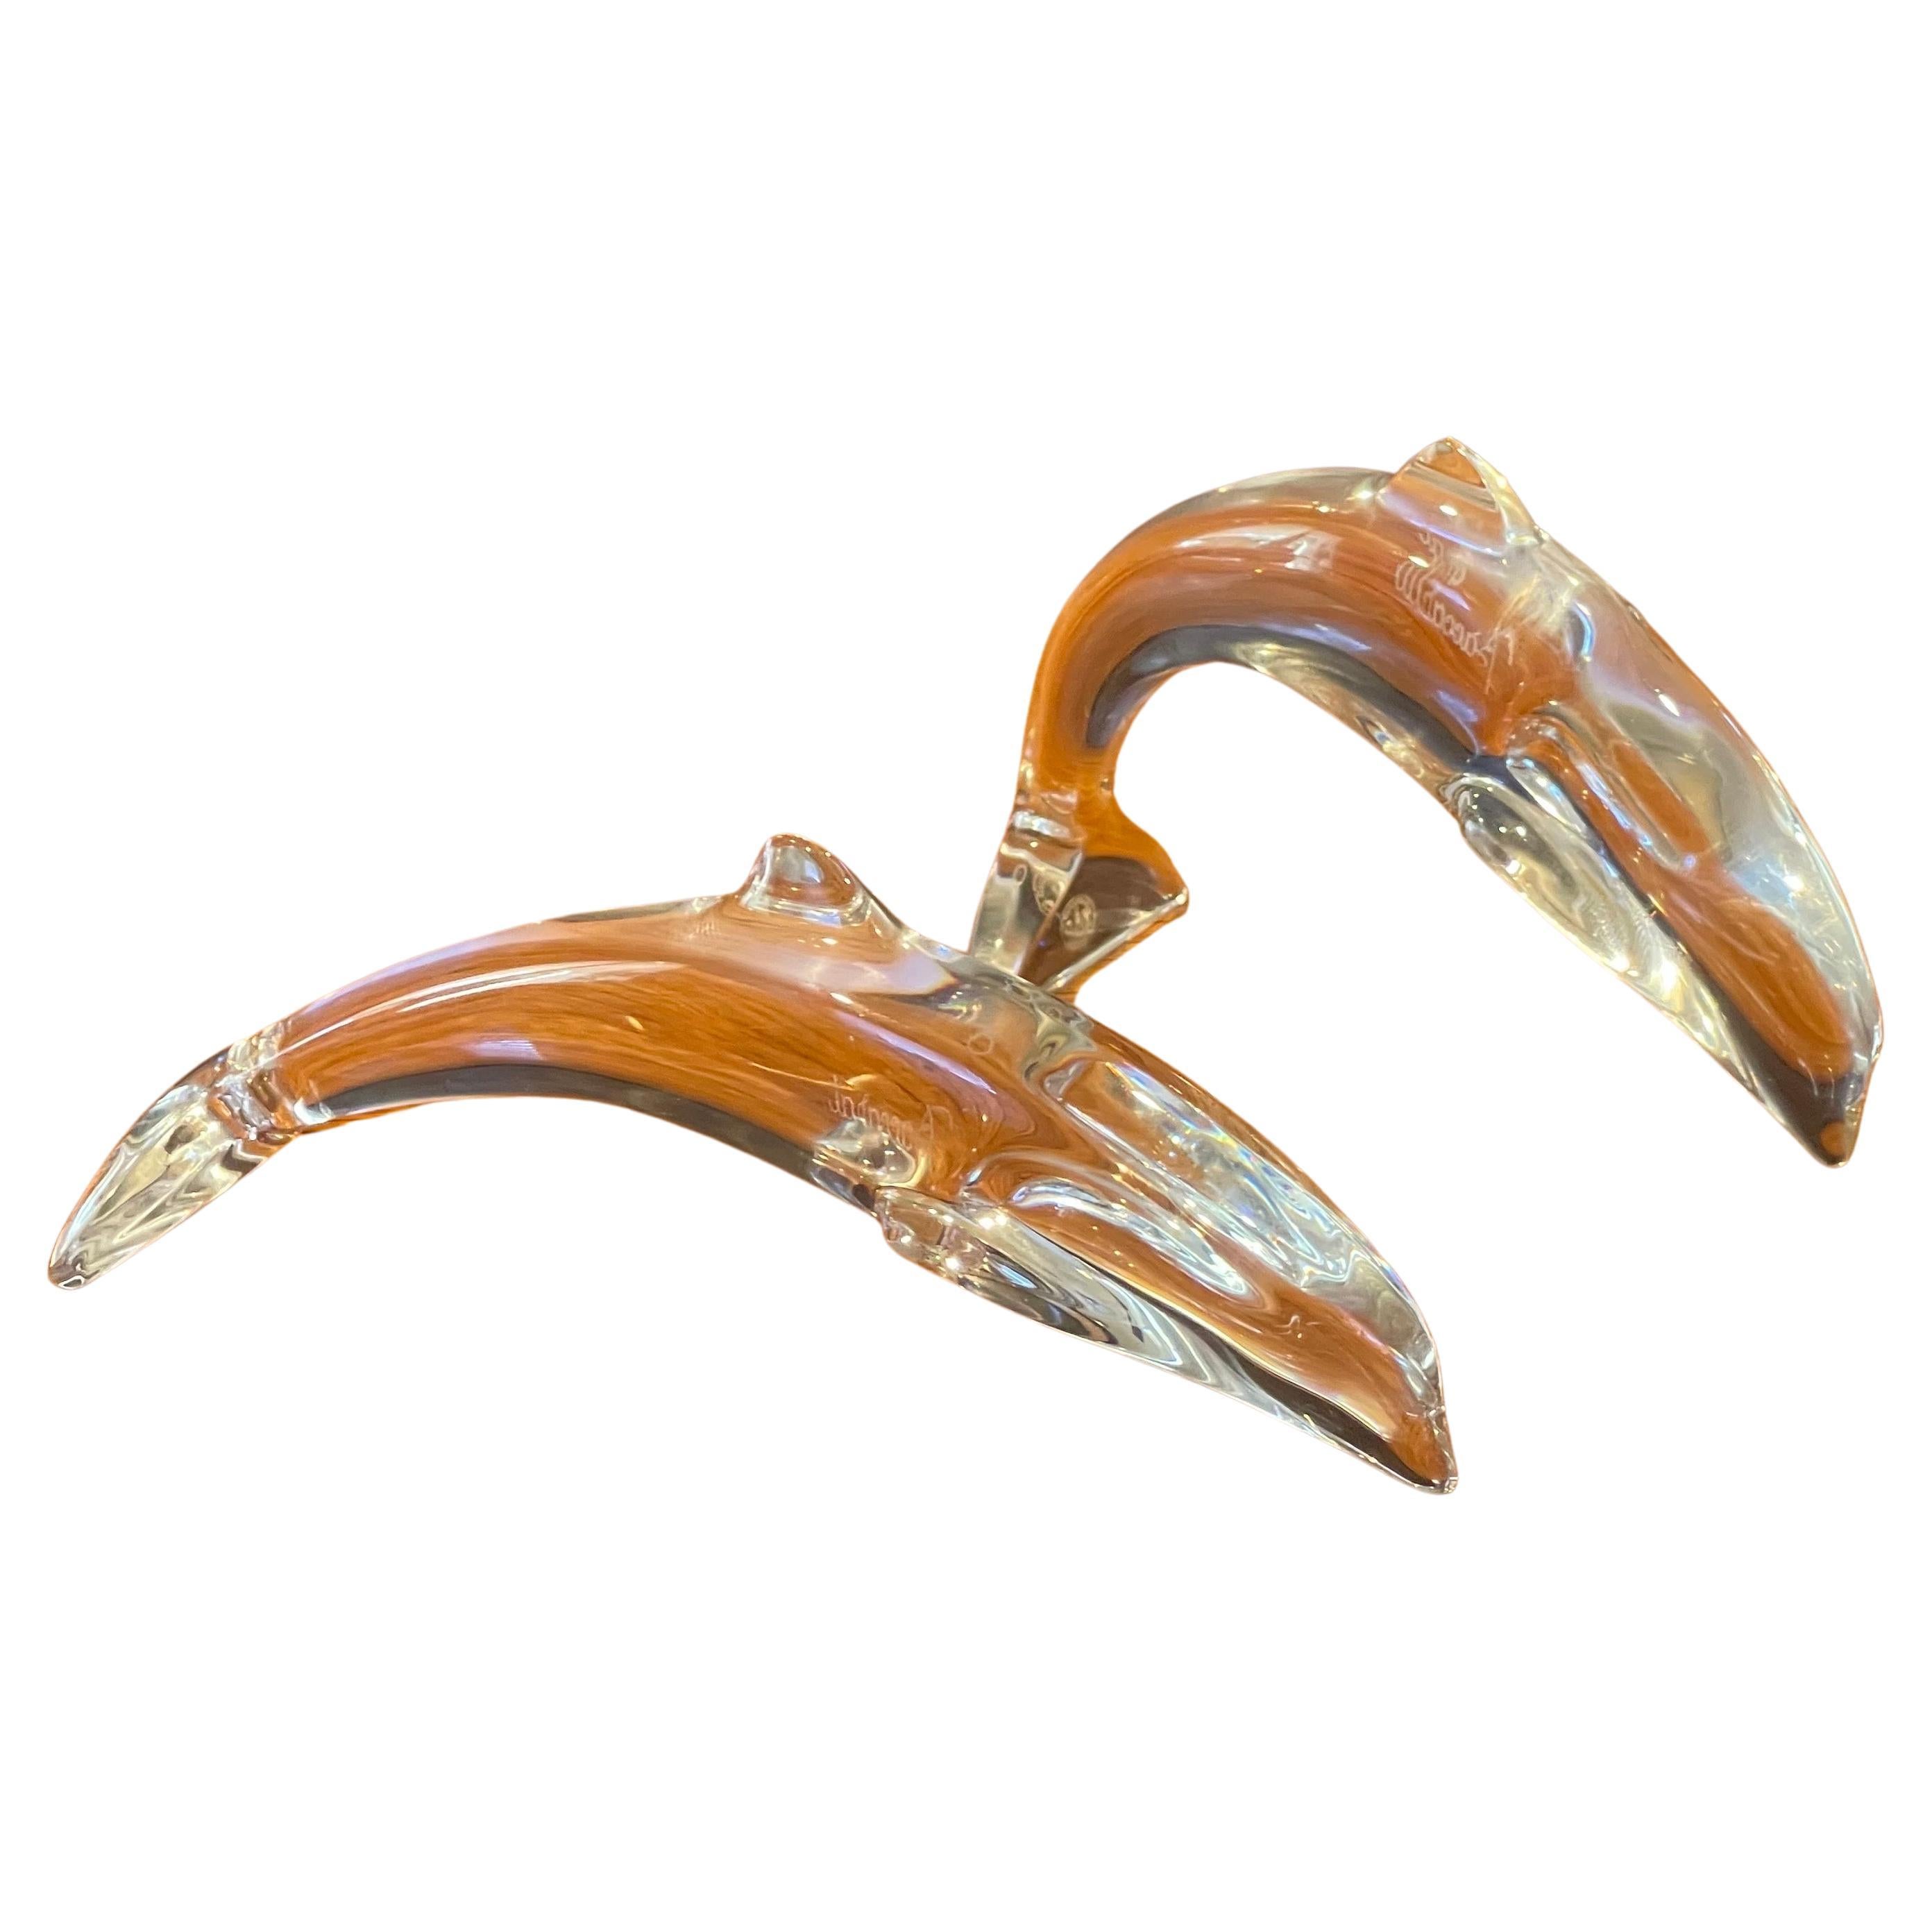 Pair of Stylized Crystal Dolphin Sculptures / Paperweights by Baccarat